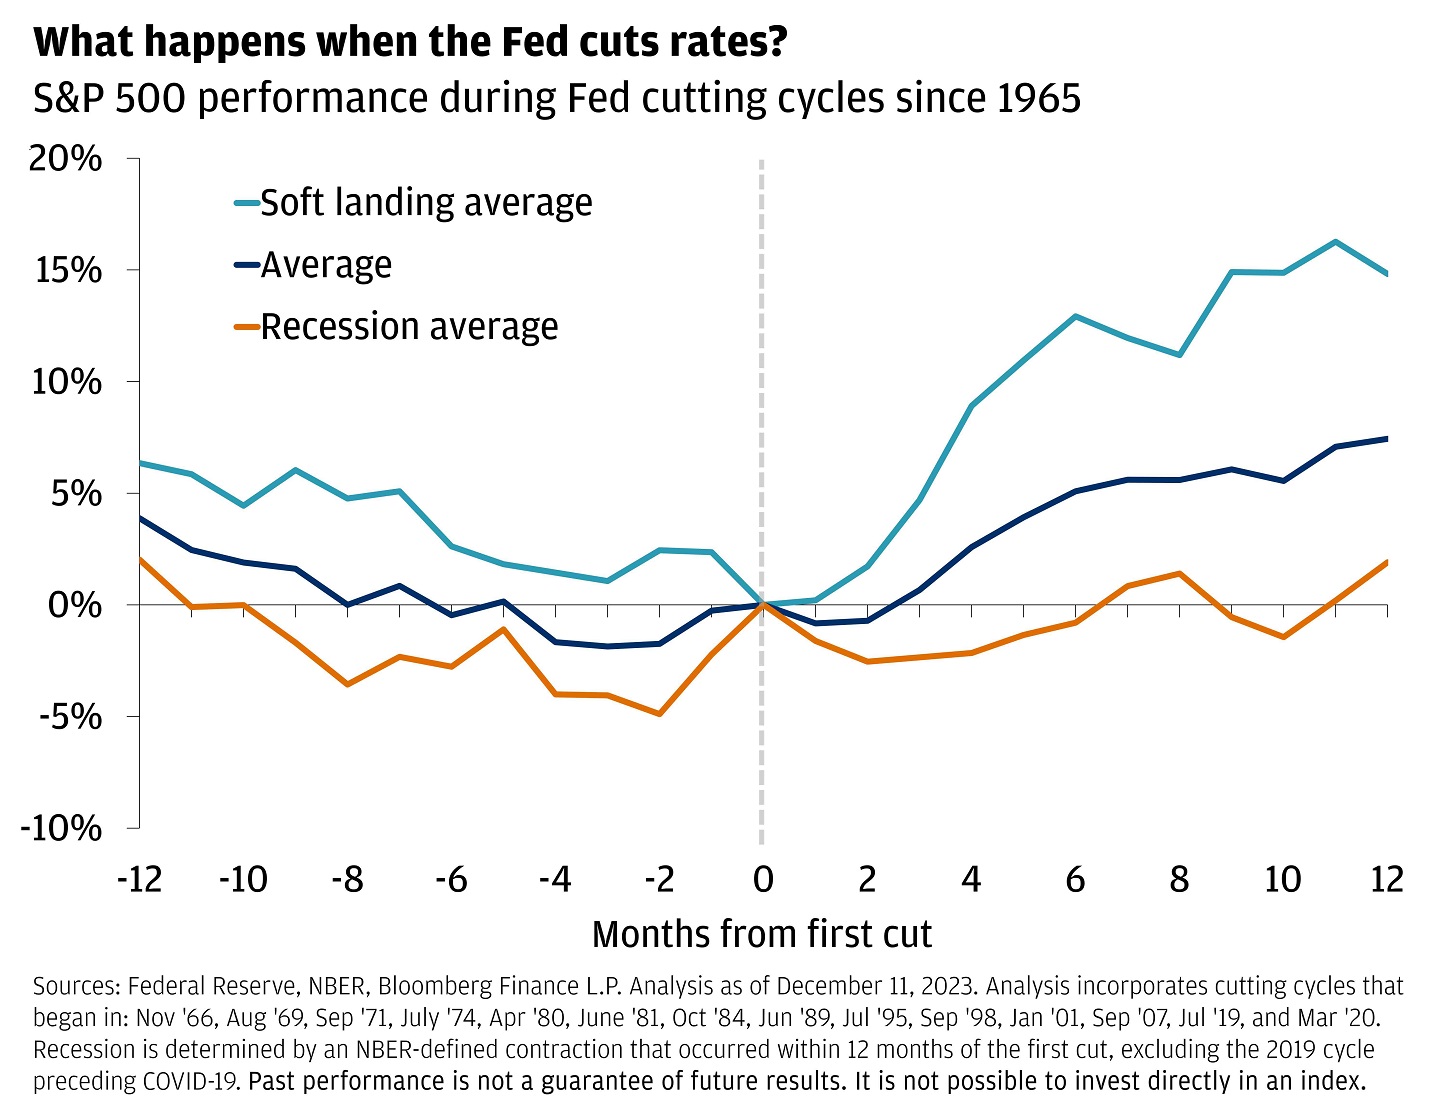 The chart describes S&P 500 performance during Fed cutting cycles since 1965. It’s showing the S&P performance 12 months prior and after first cut.